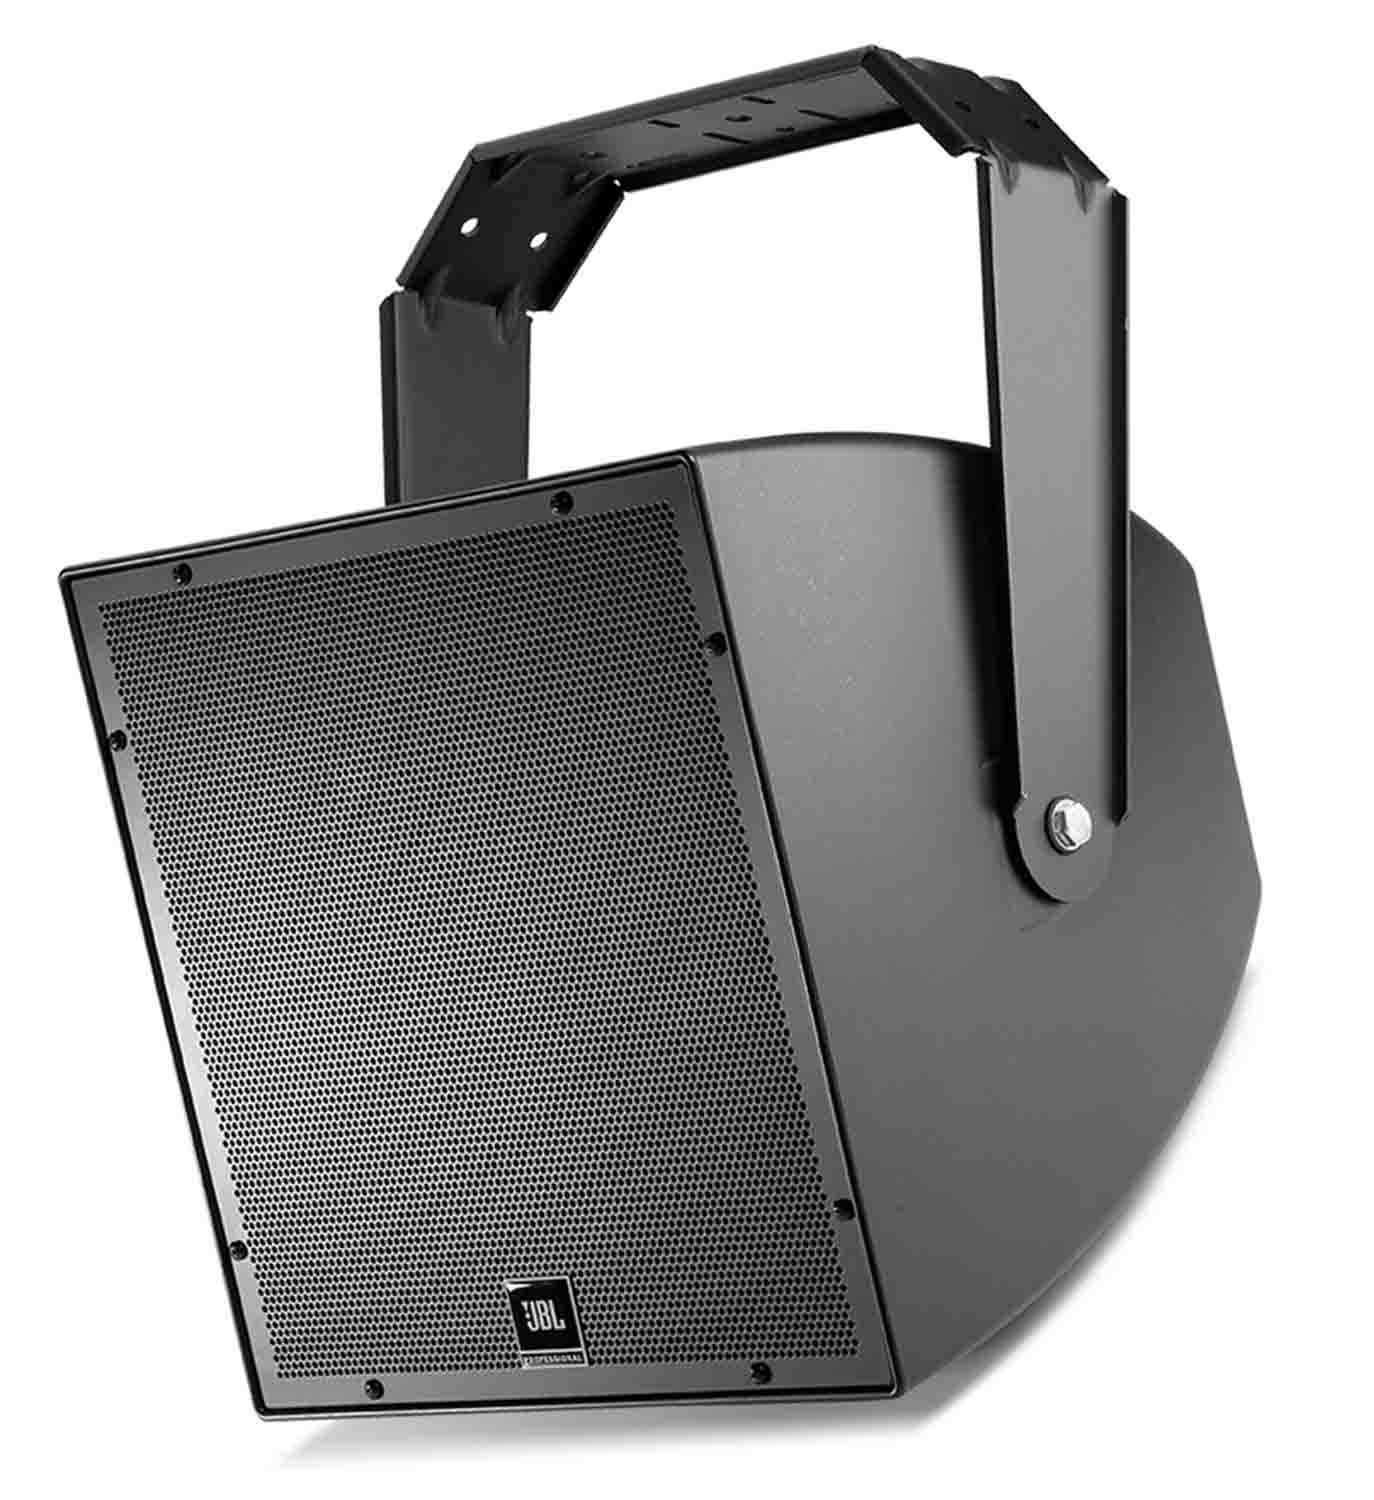 JBL AWC129-BK All-Weather Compact 2-Way Coaxial Loudspeaker with 12" LF - Black - Hollywood DJ